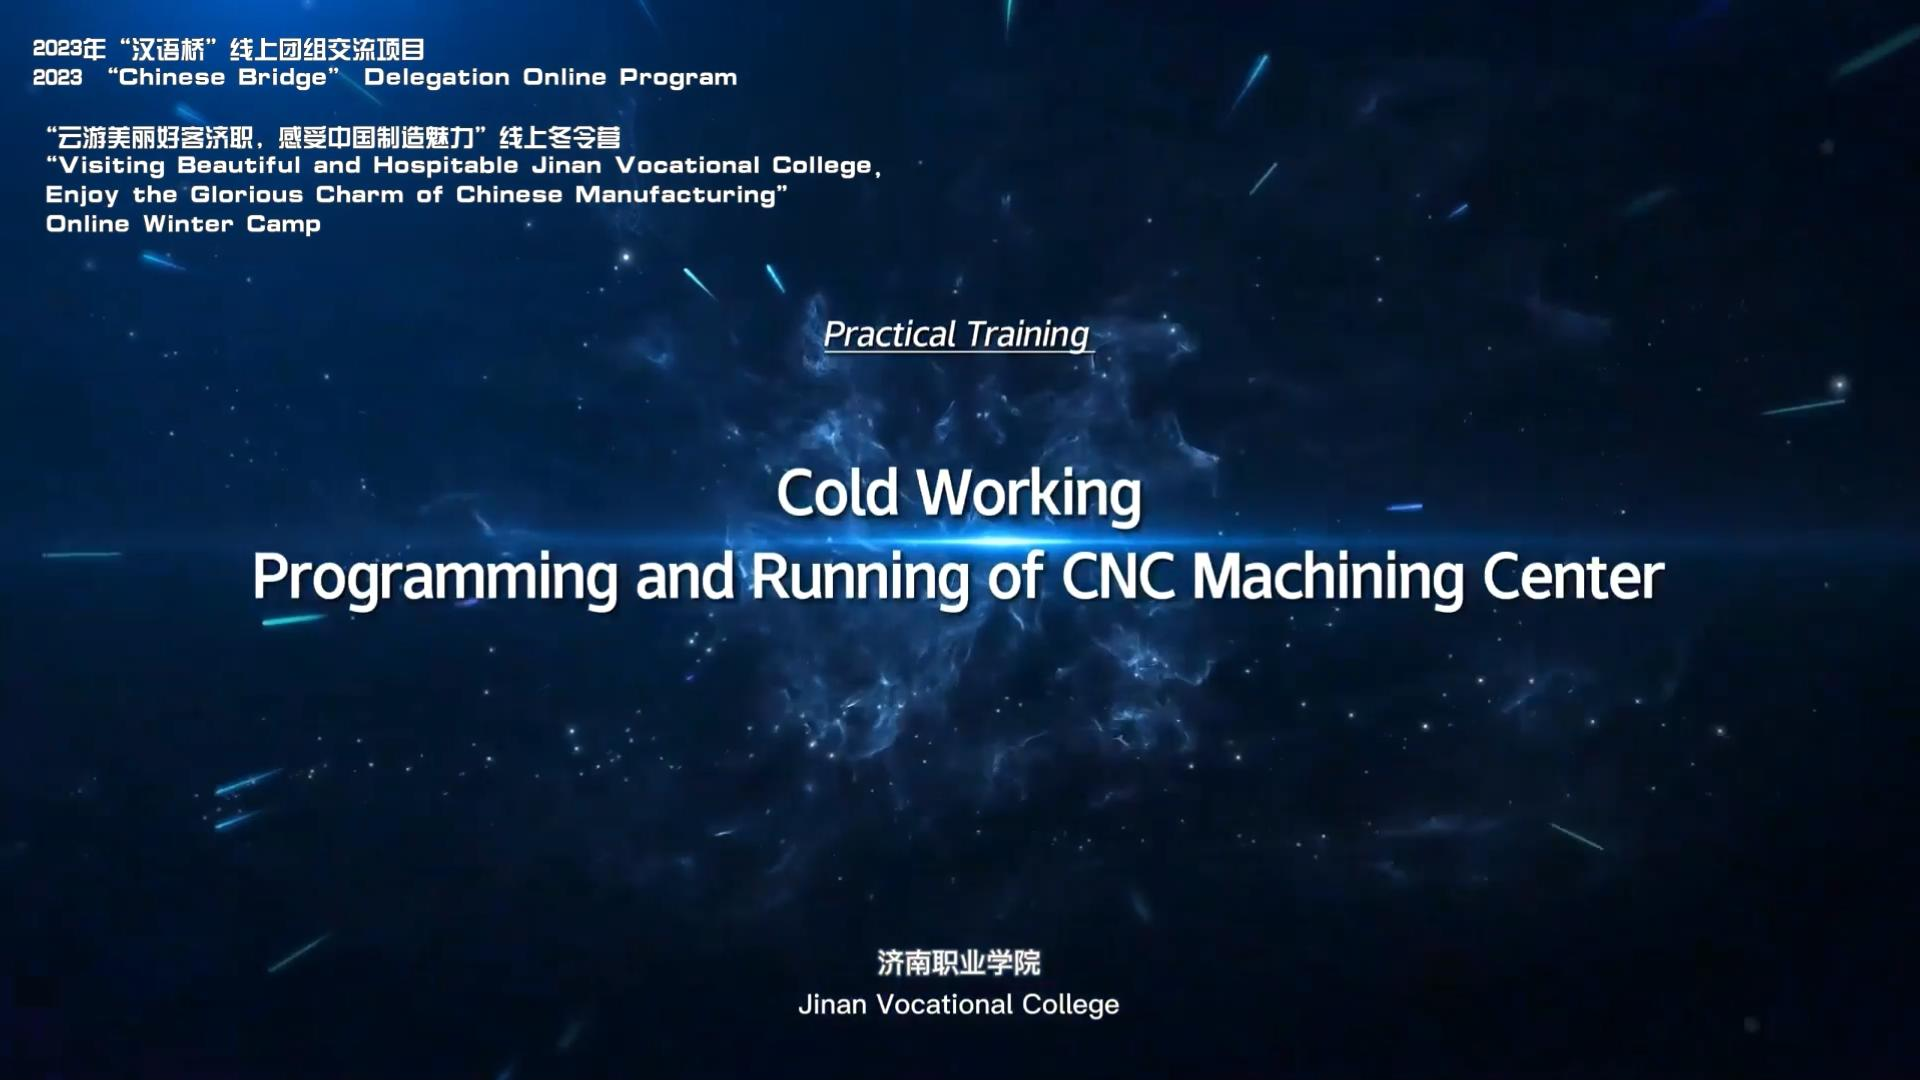 Cold Working- Programming and Running of CNC Machining Center